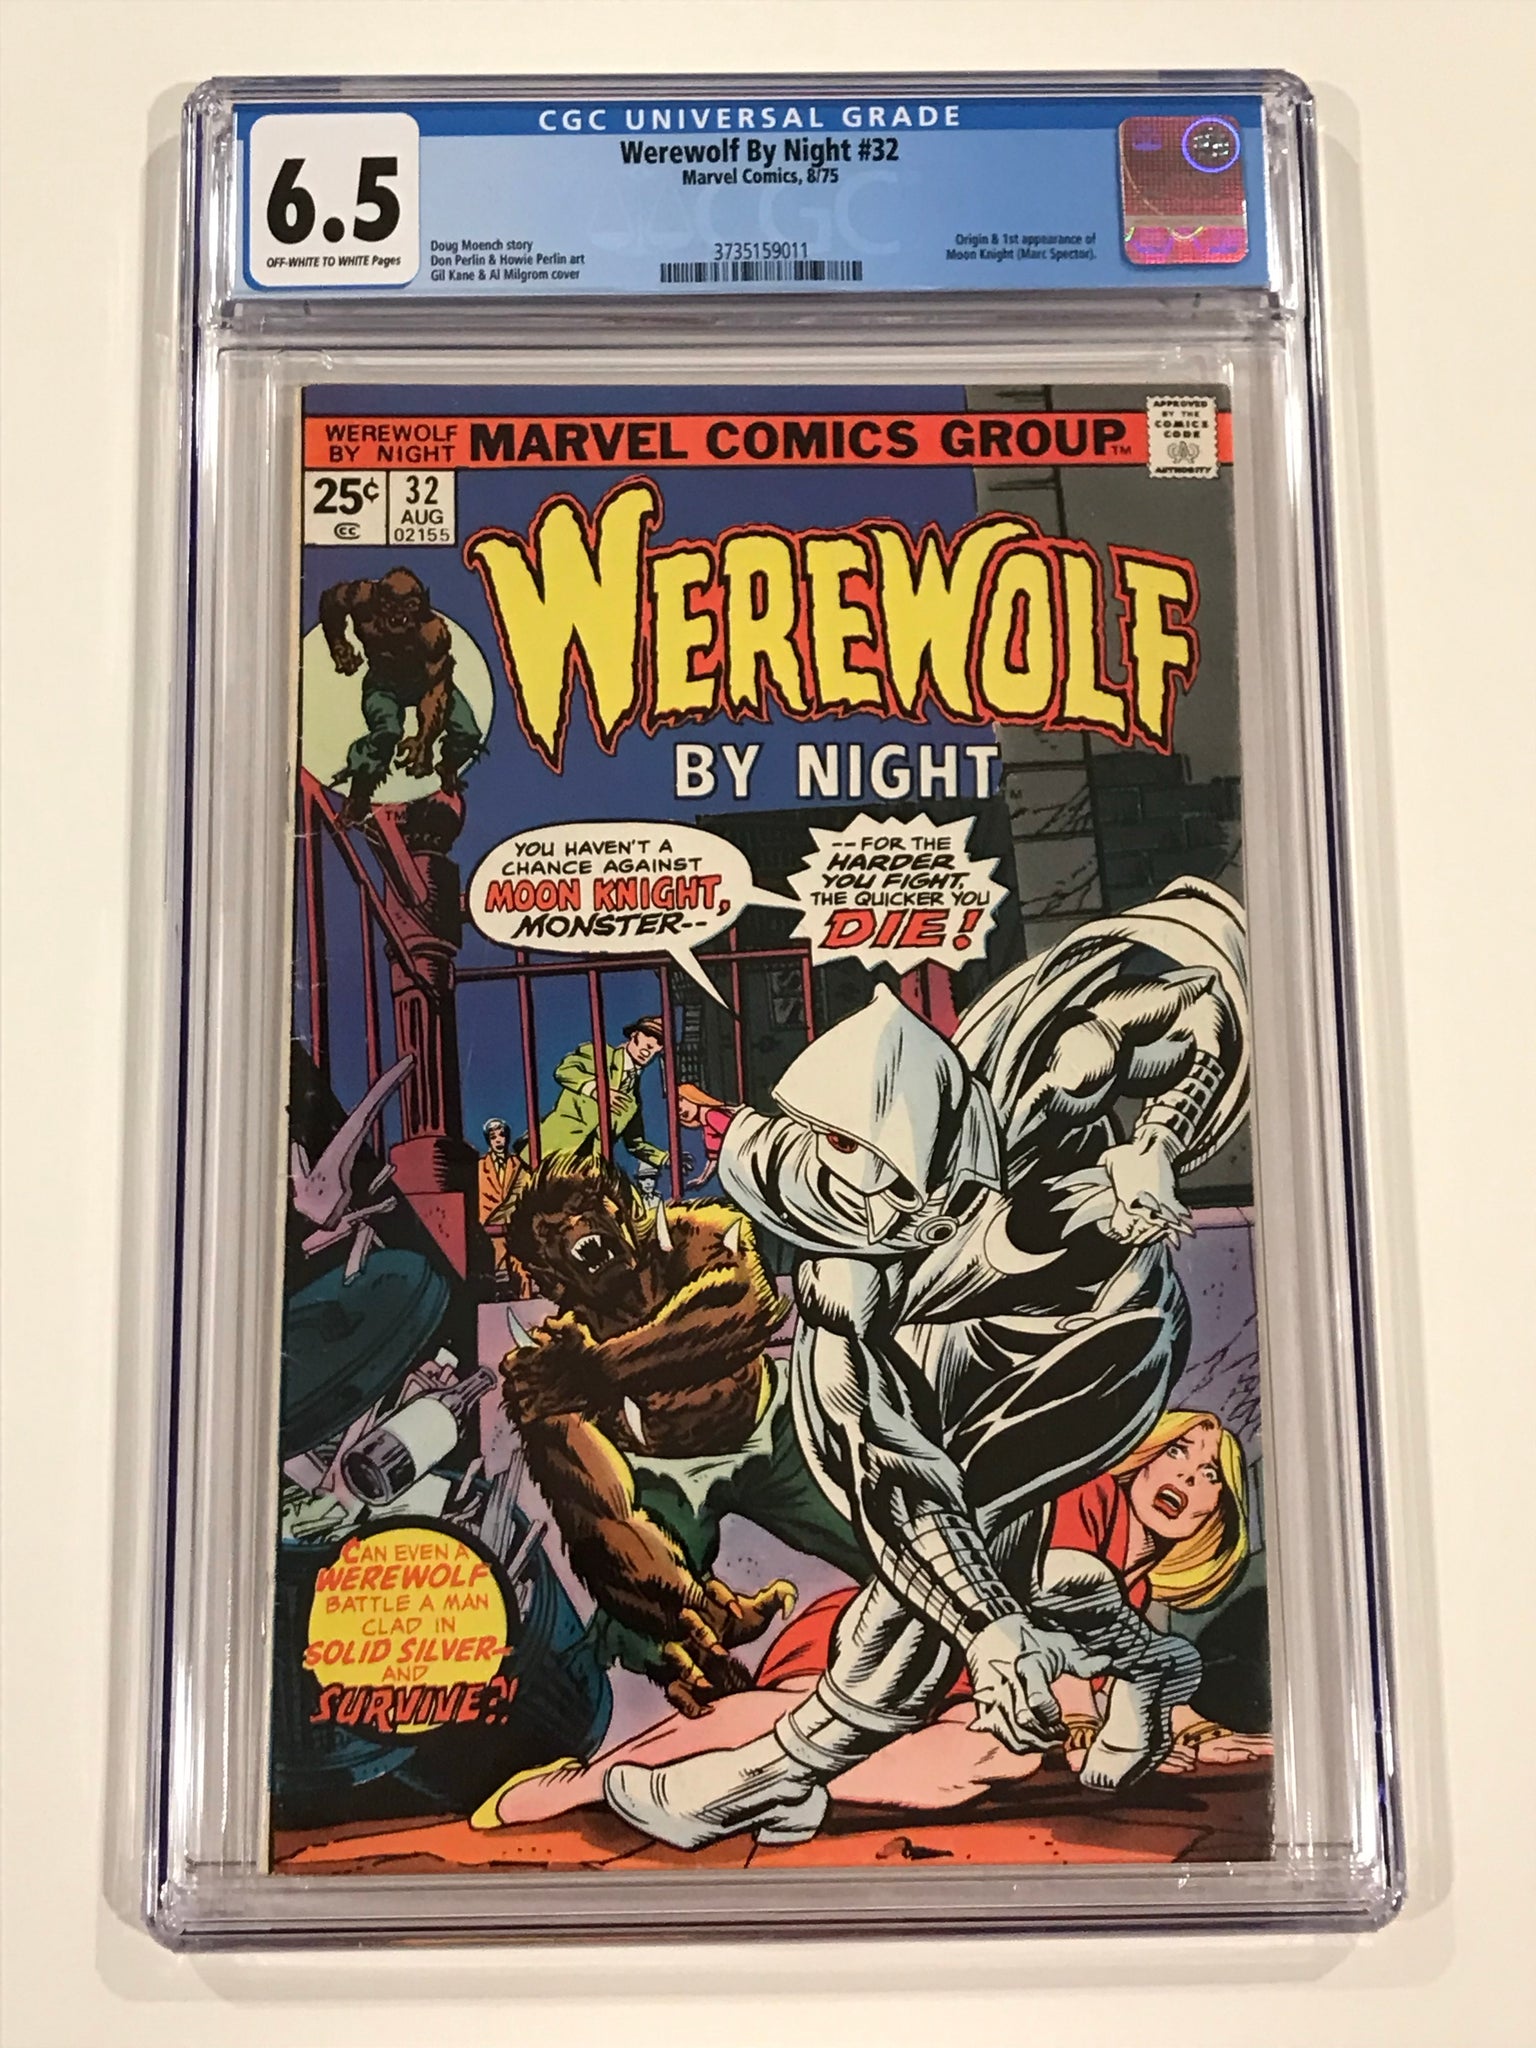 Marvel Comics Werewolf by Night #32 1st appearance of Moon Knight cover  print 11 by 17, 8.5 by 11 or 15 by 24 (not the actual comic book)